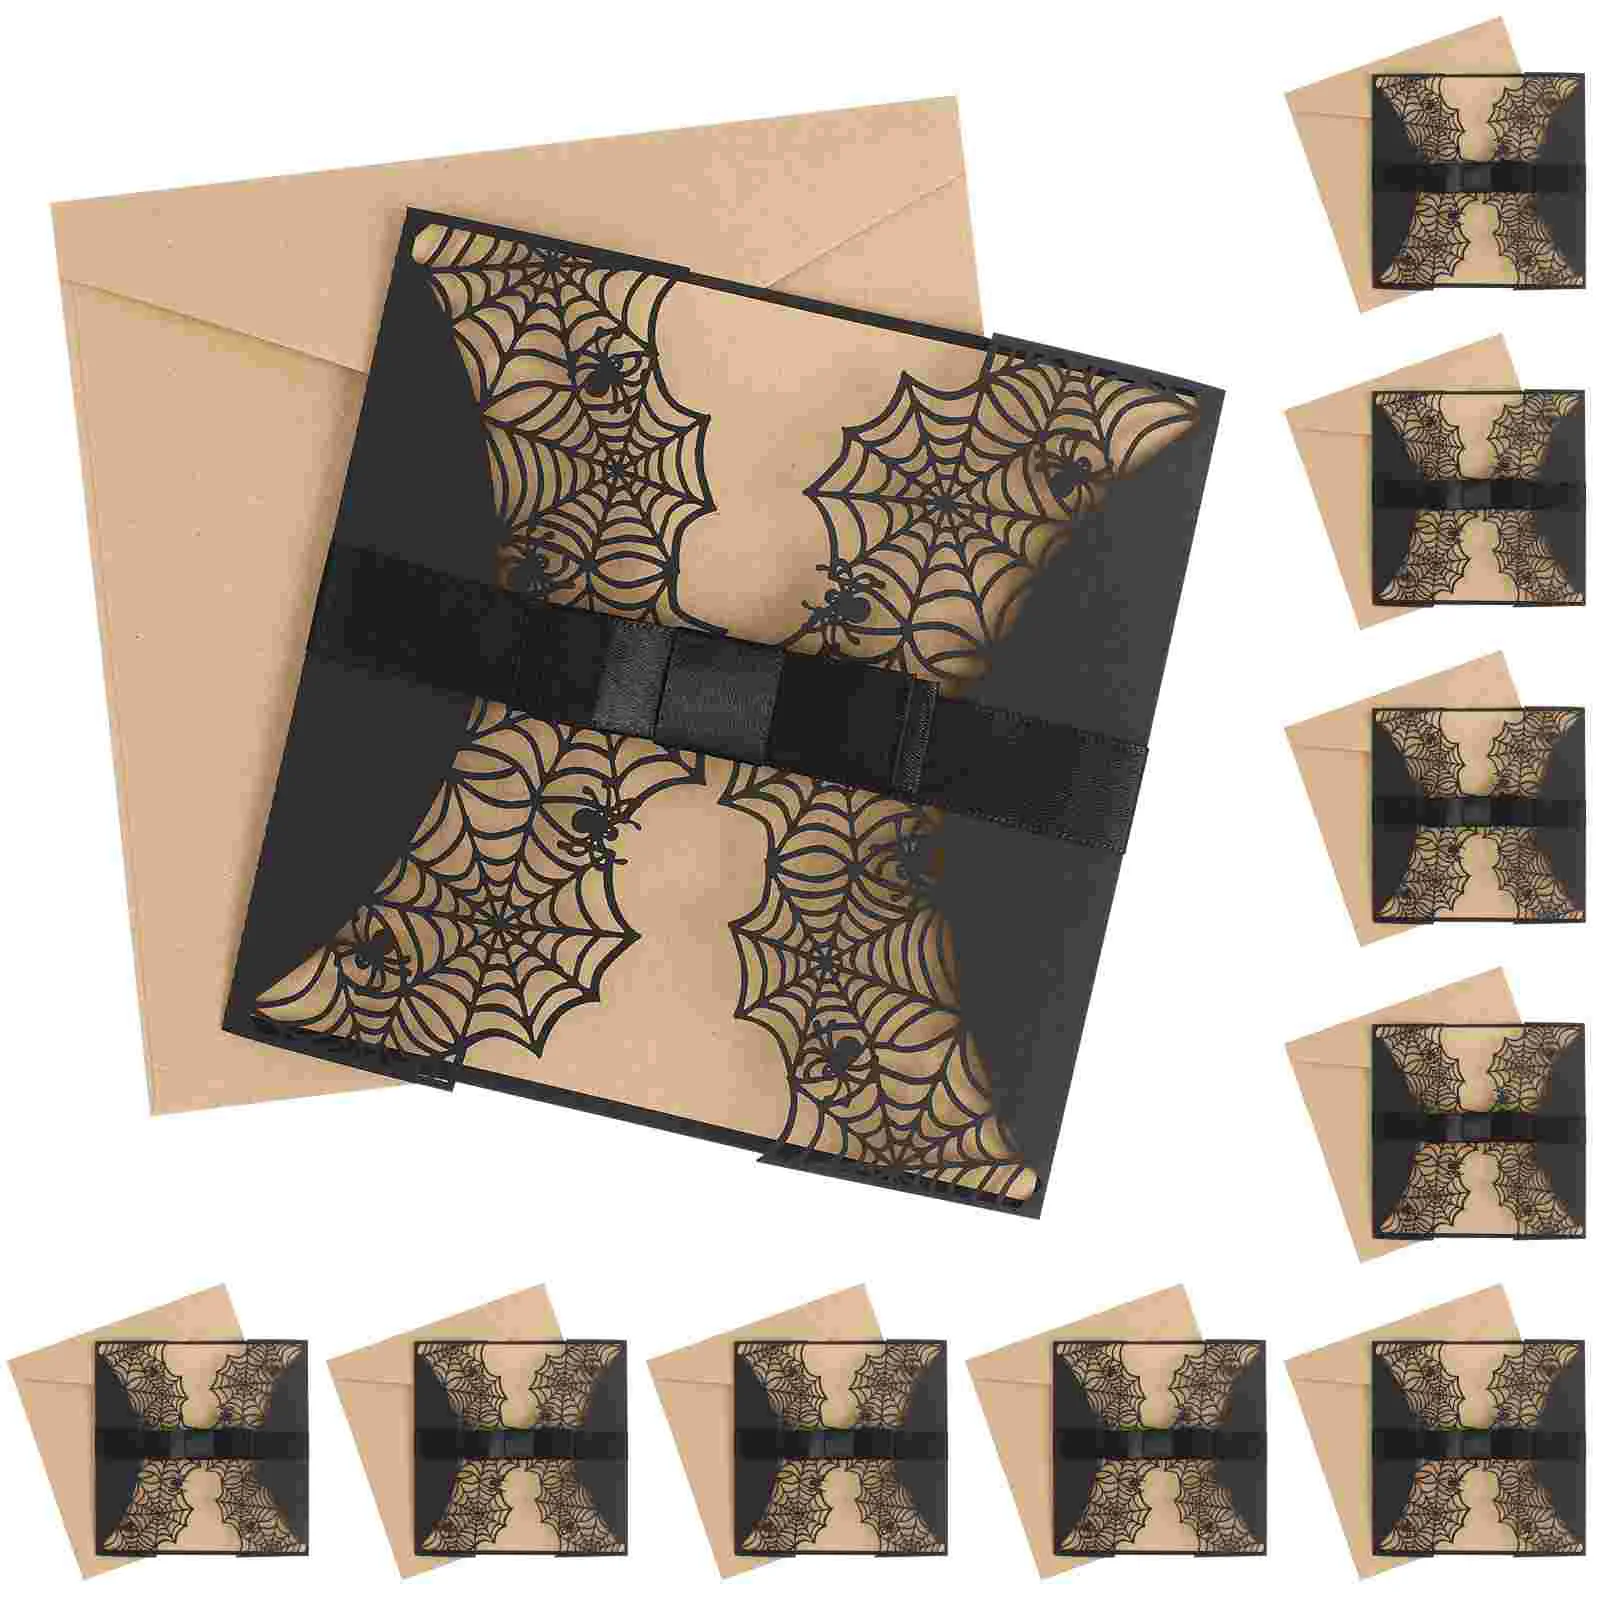 

10pcs Invitations Cards and Envelopes Party Spiderweb Design Cards Wedding announcement